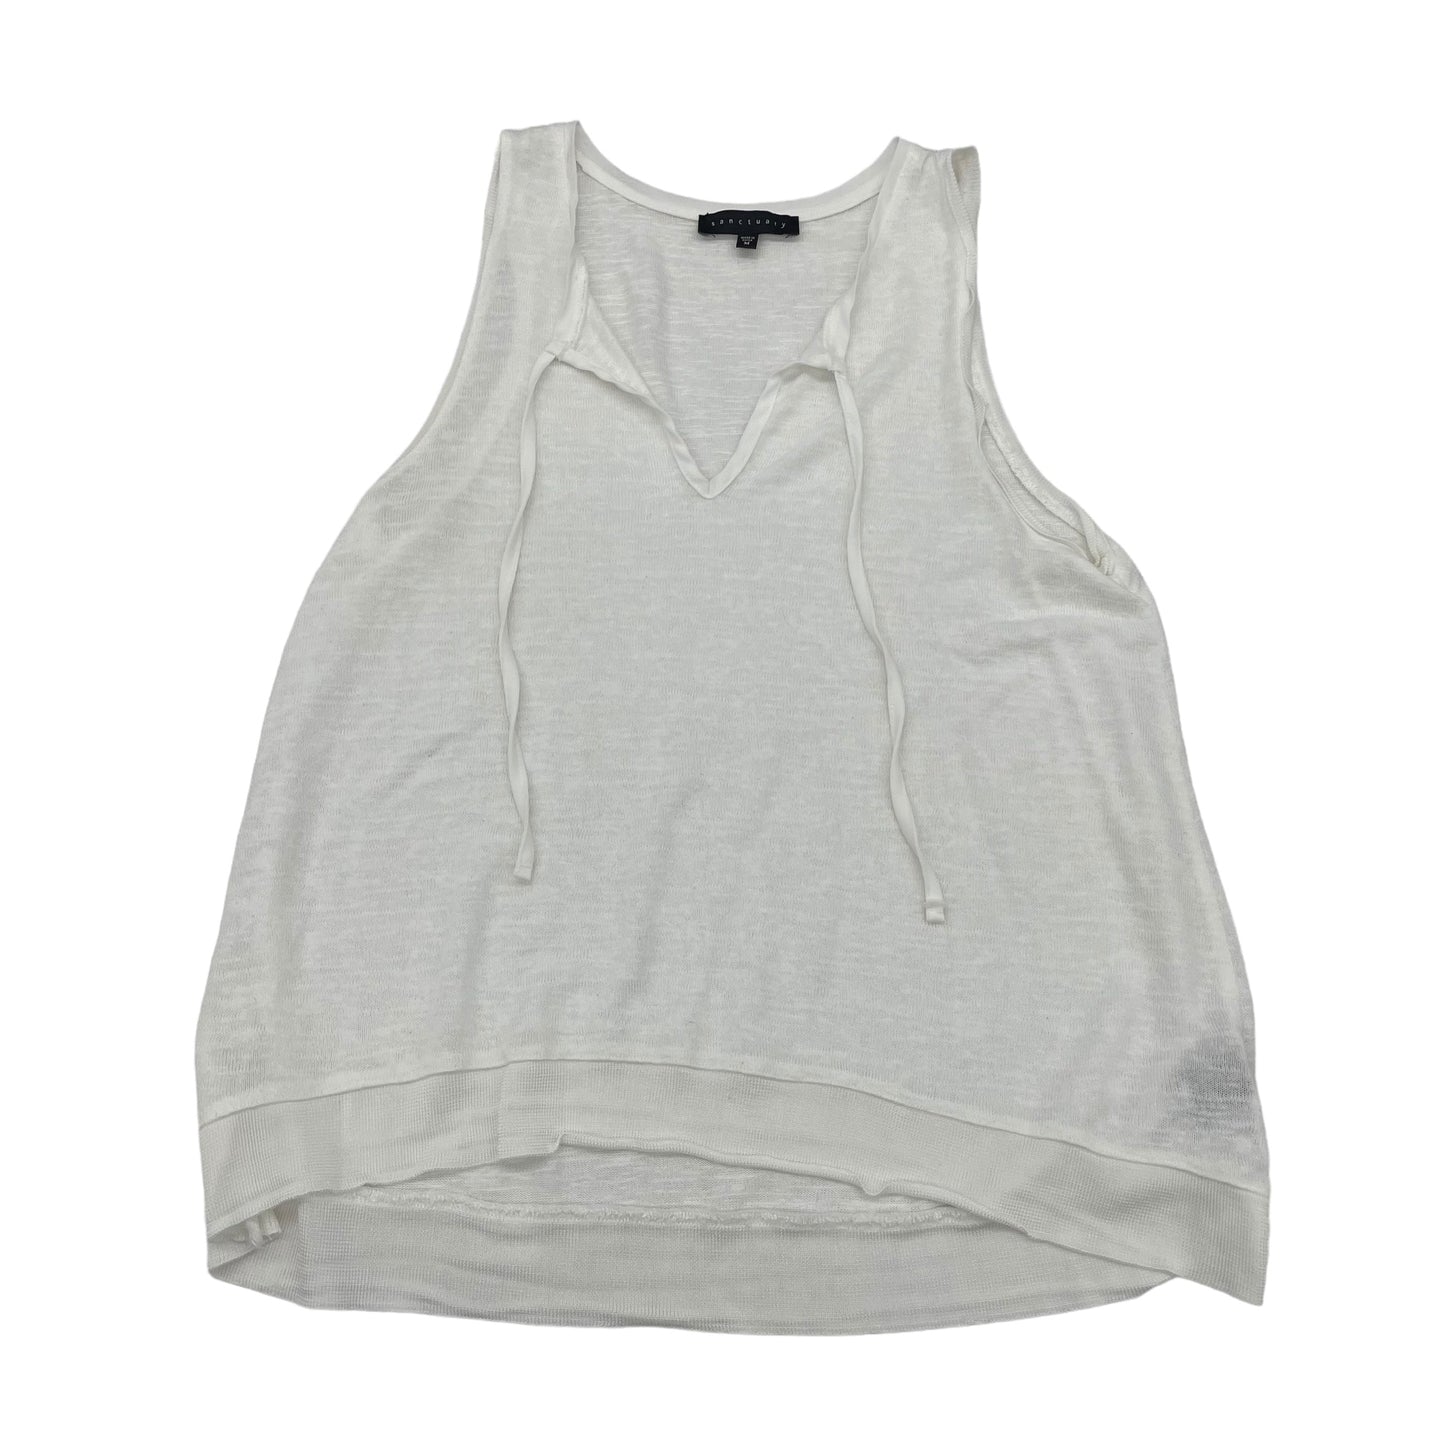 WHITE TOP SLEEVELESS by SANCTUARY Size:M